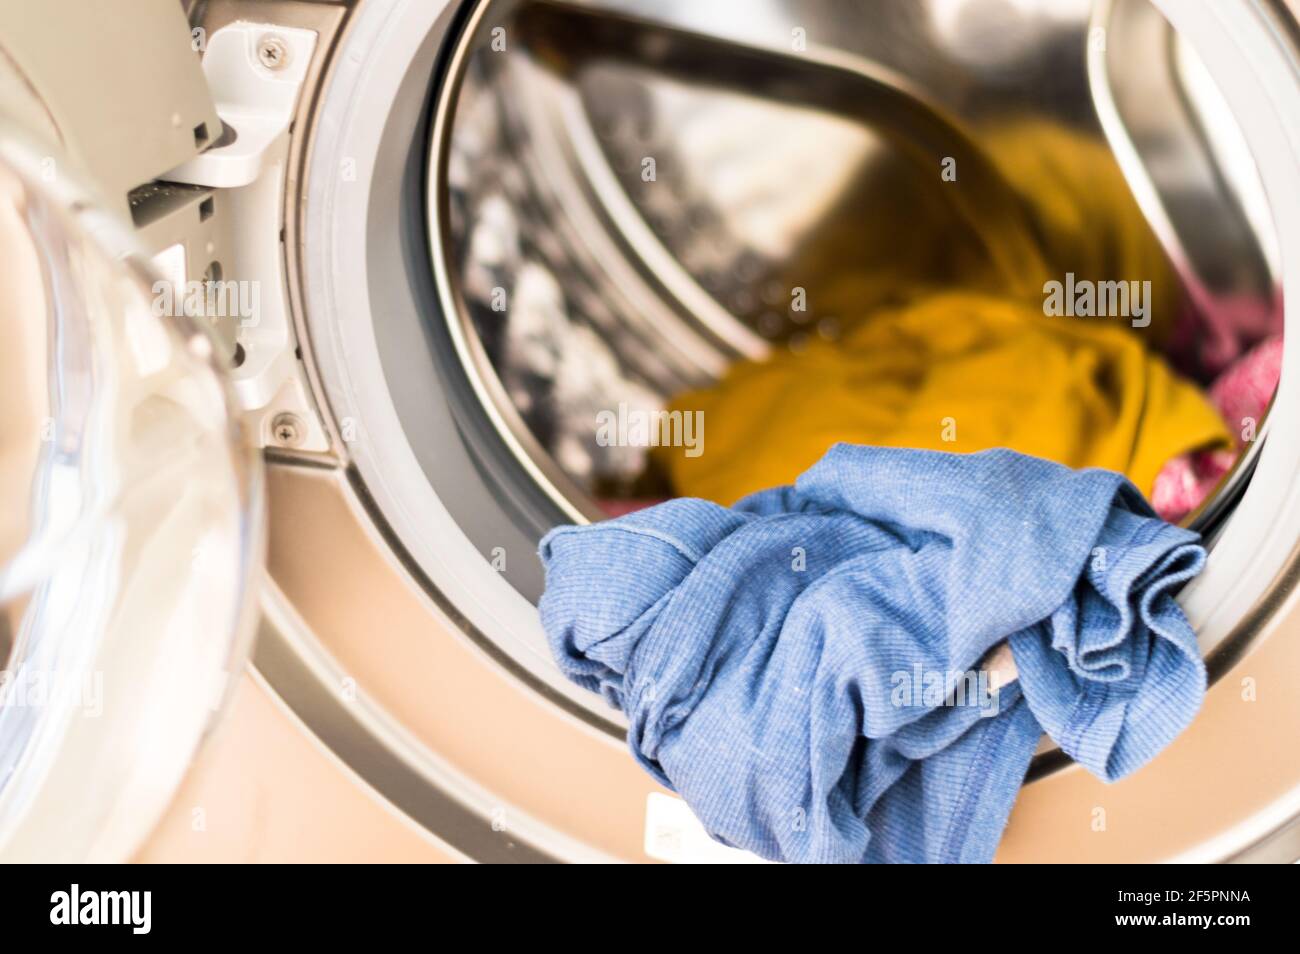 Clothes in washing machine for laundry at home Stock Photo